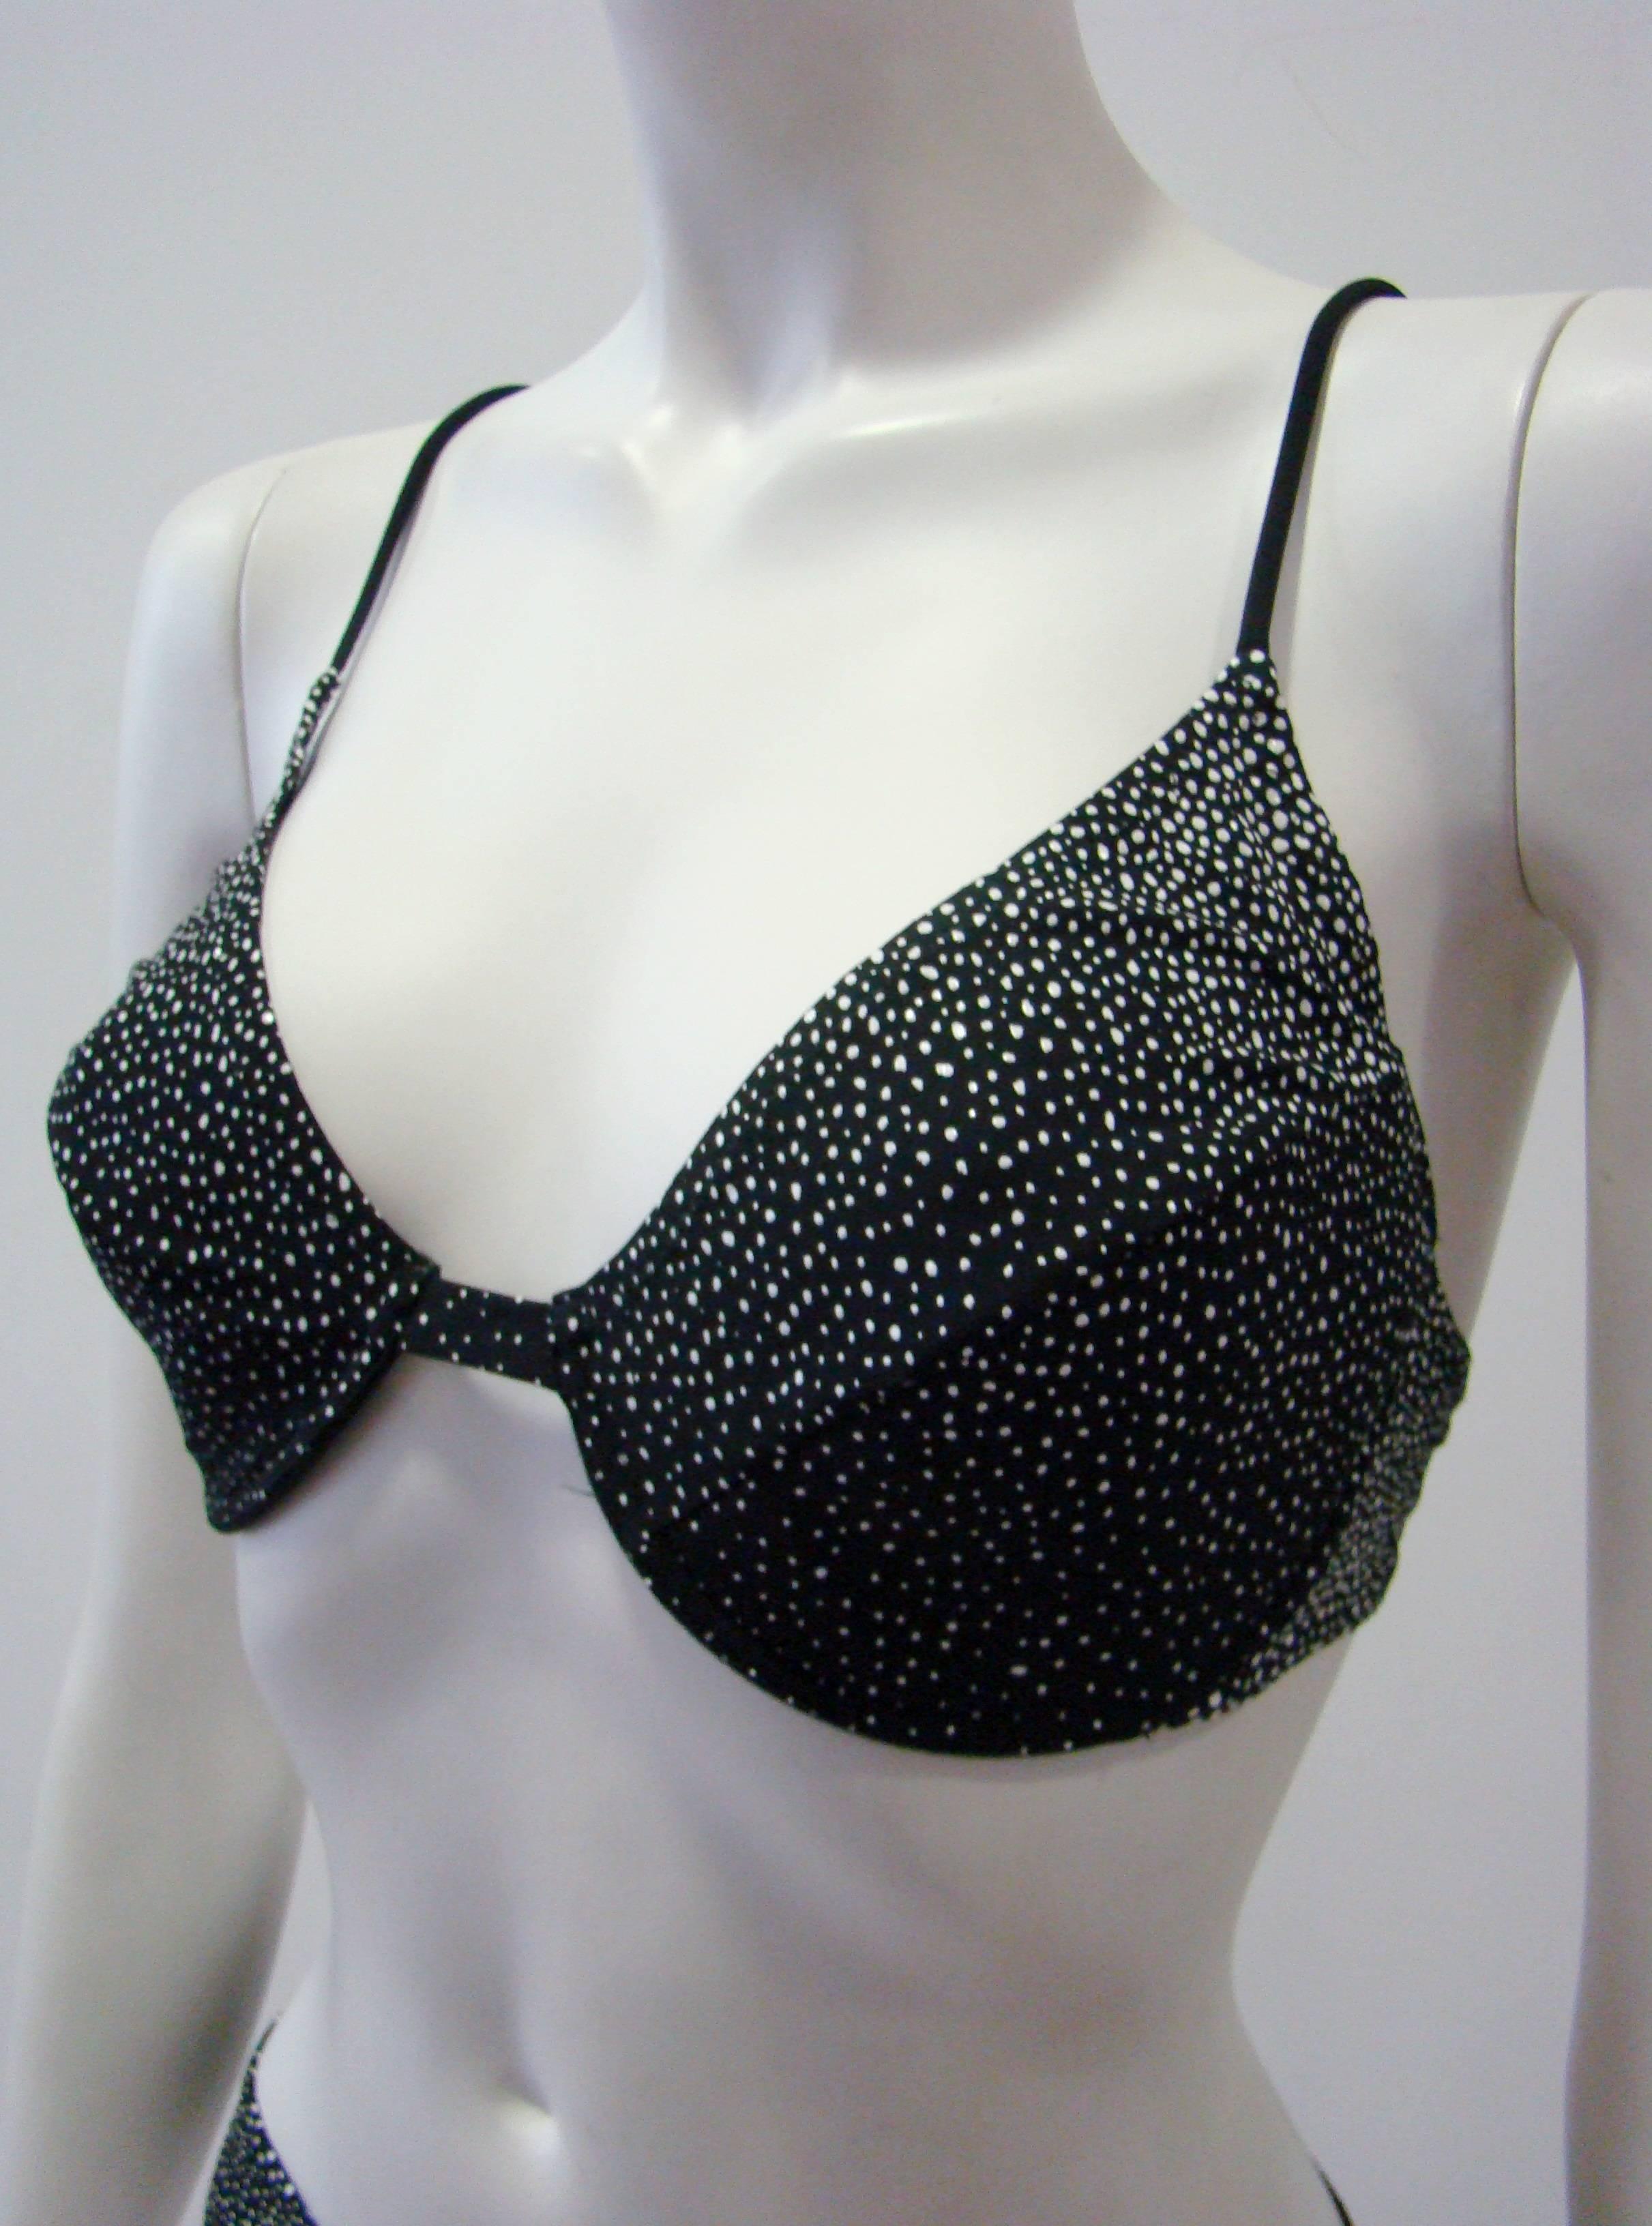 Gianfranco Ferre Separate Bikini With White Dots In Excellent Condition For Sale In Athens, Agia Paraskevi